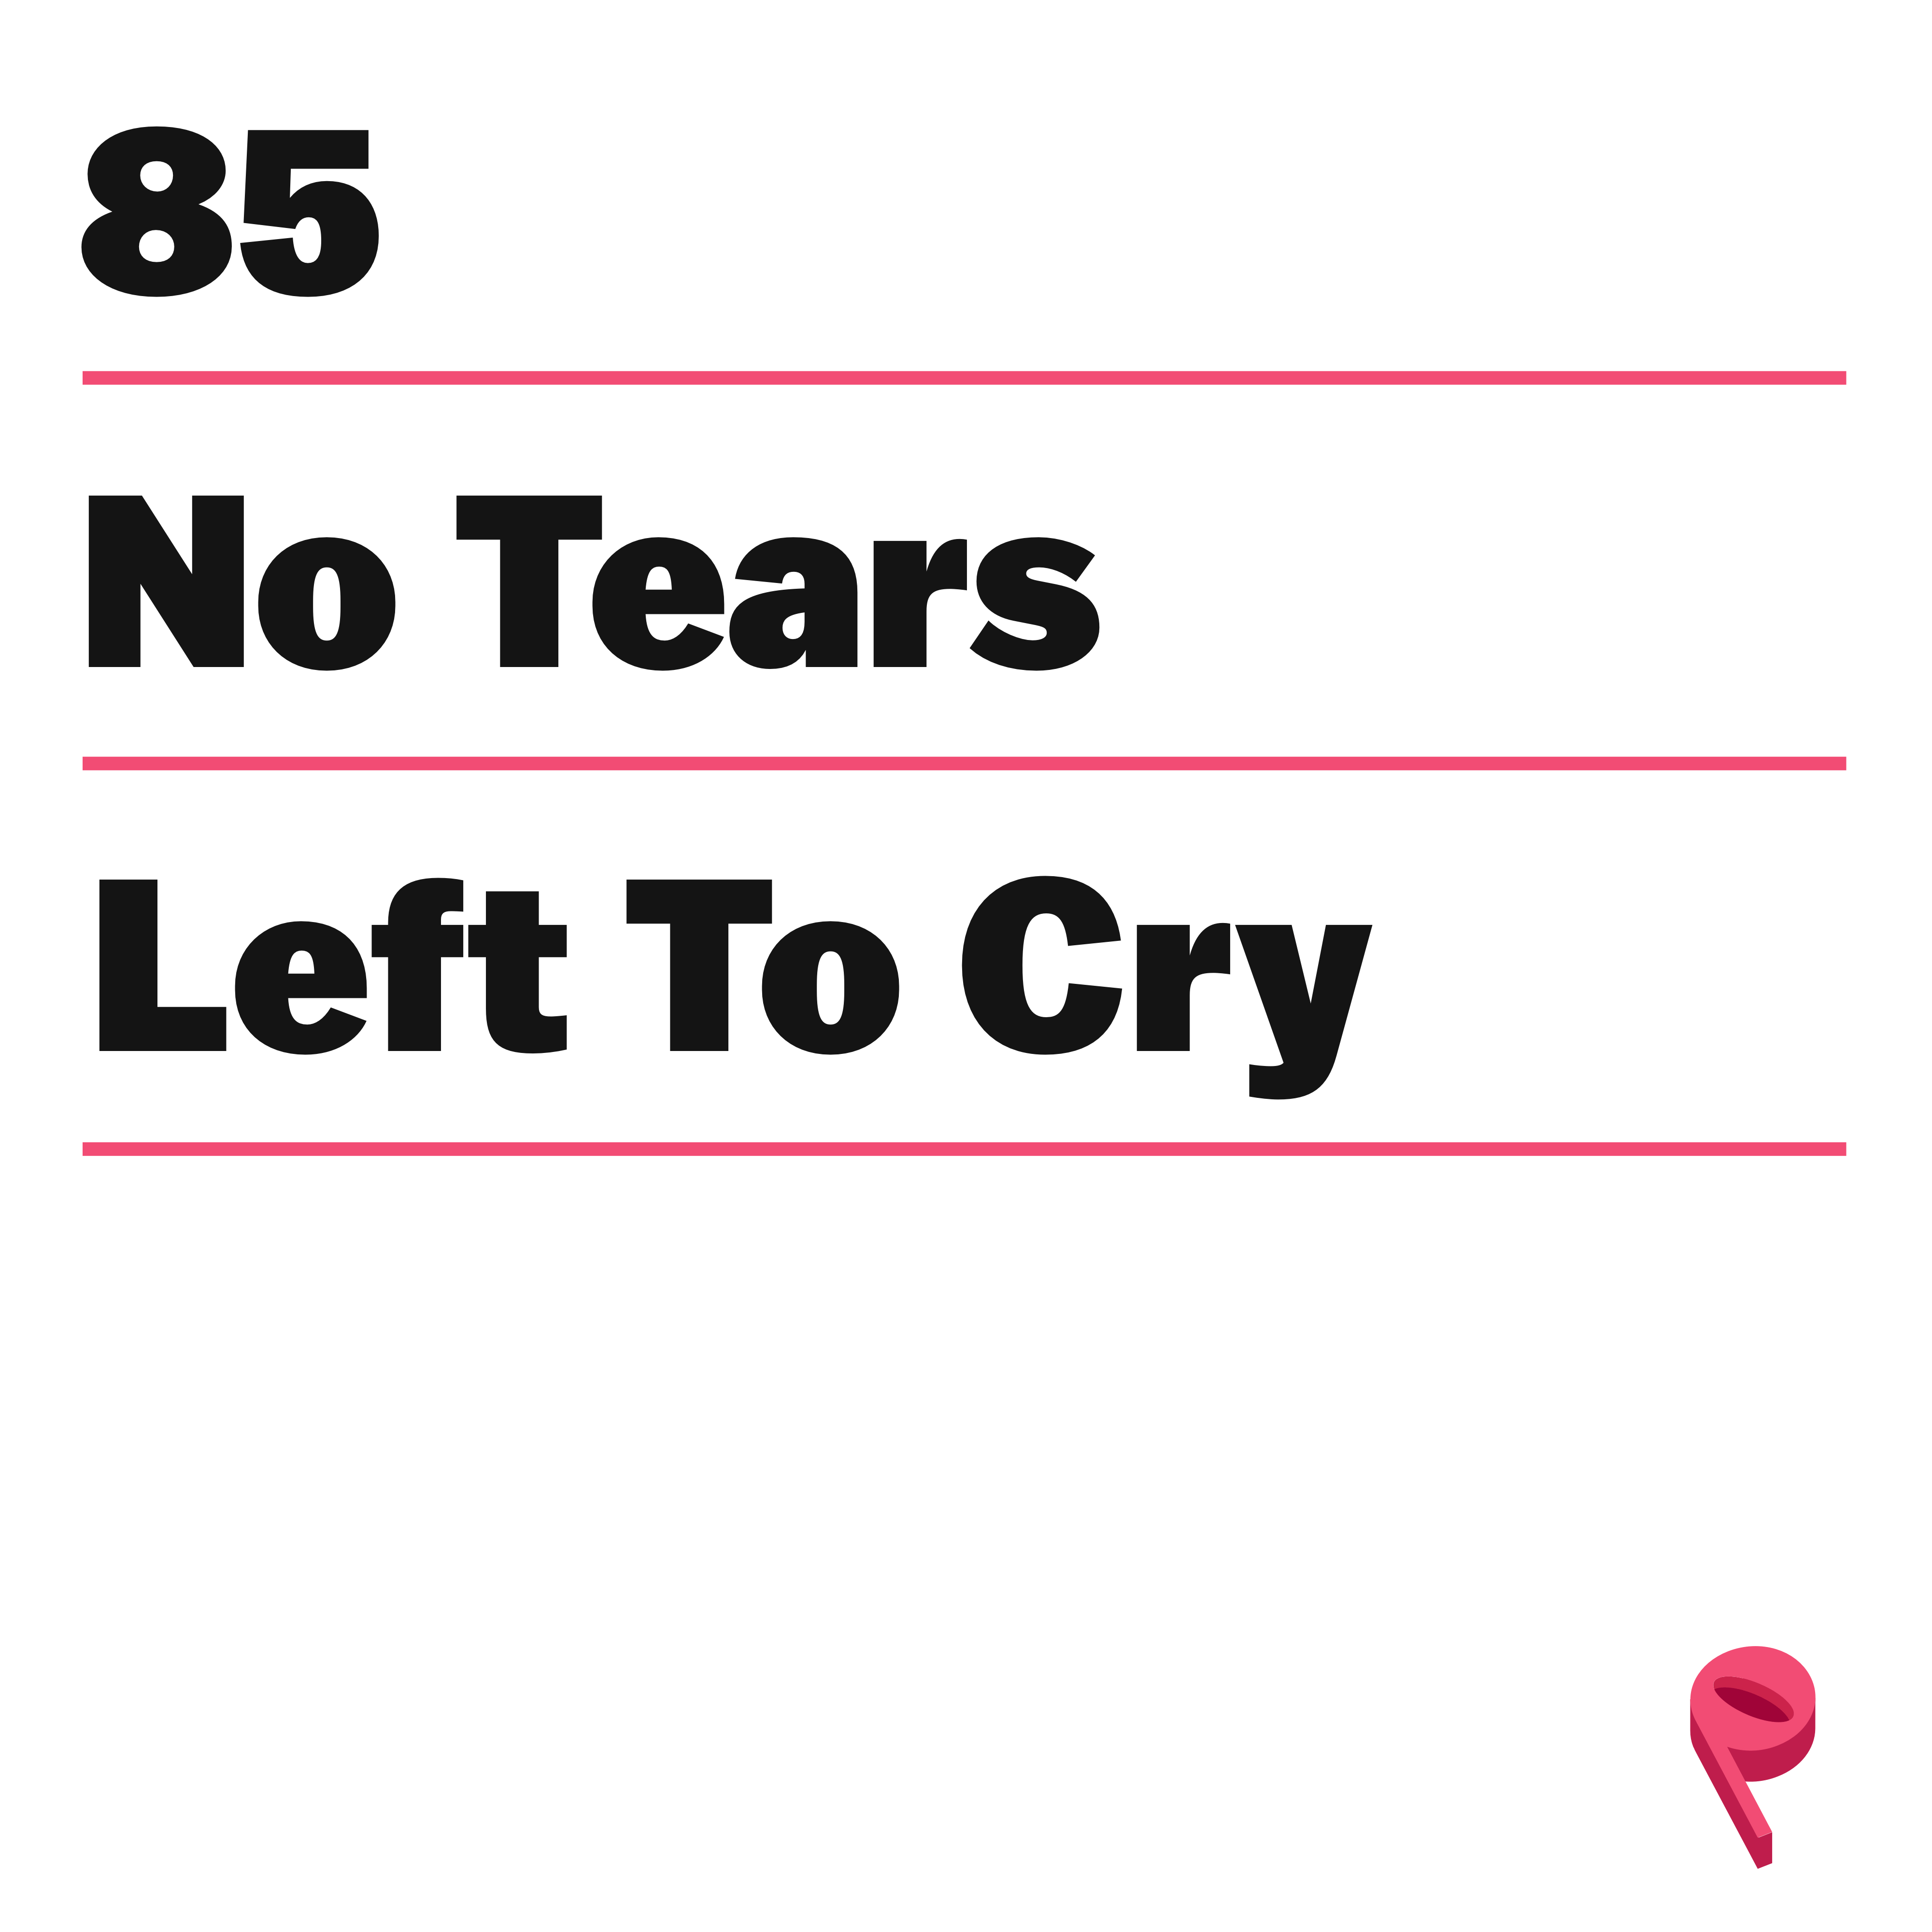 Finding Equanimity In 'No Tears Left To Cry'